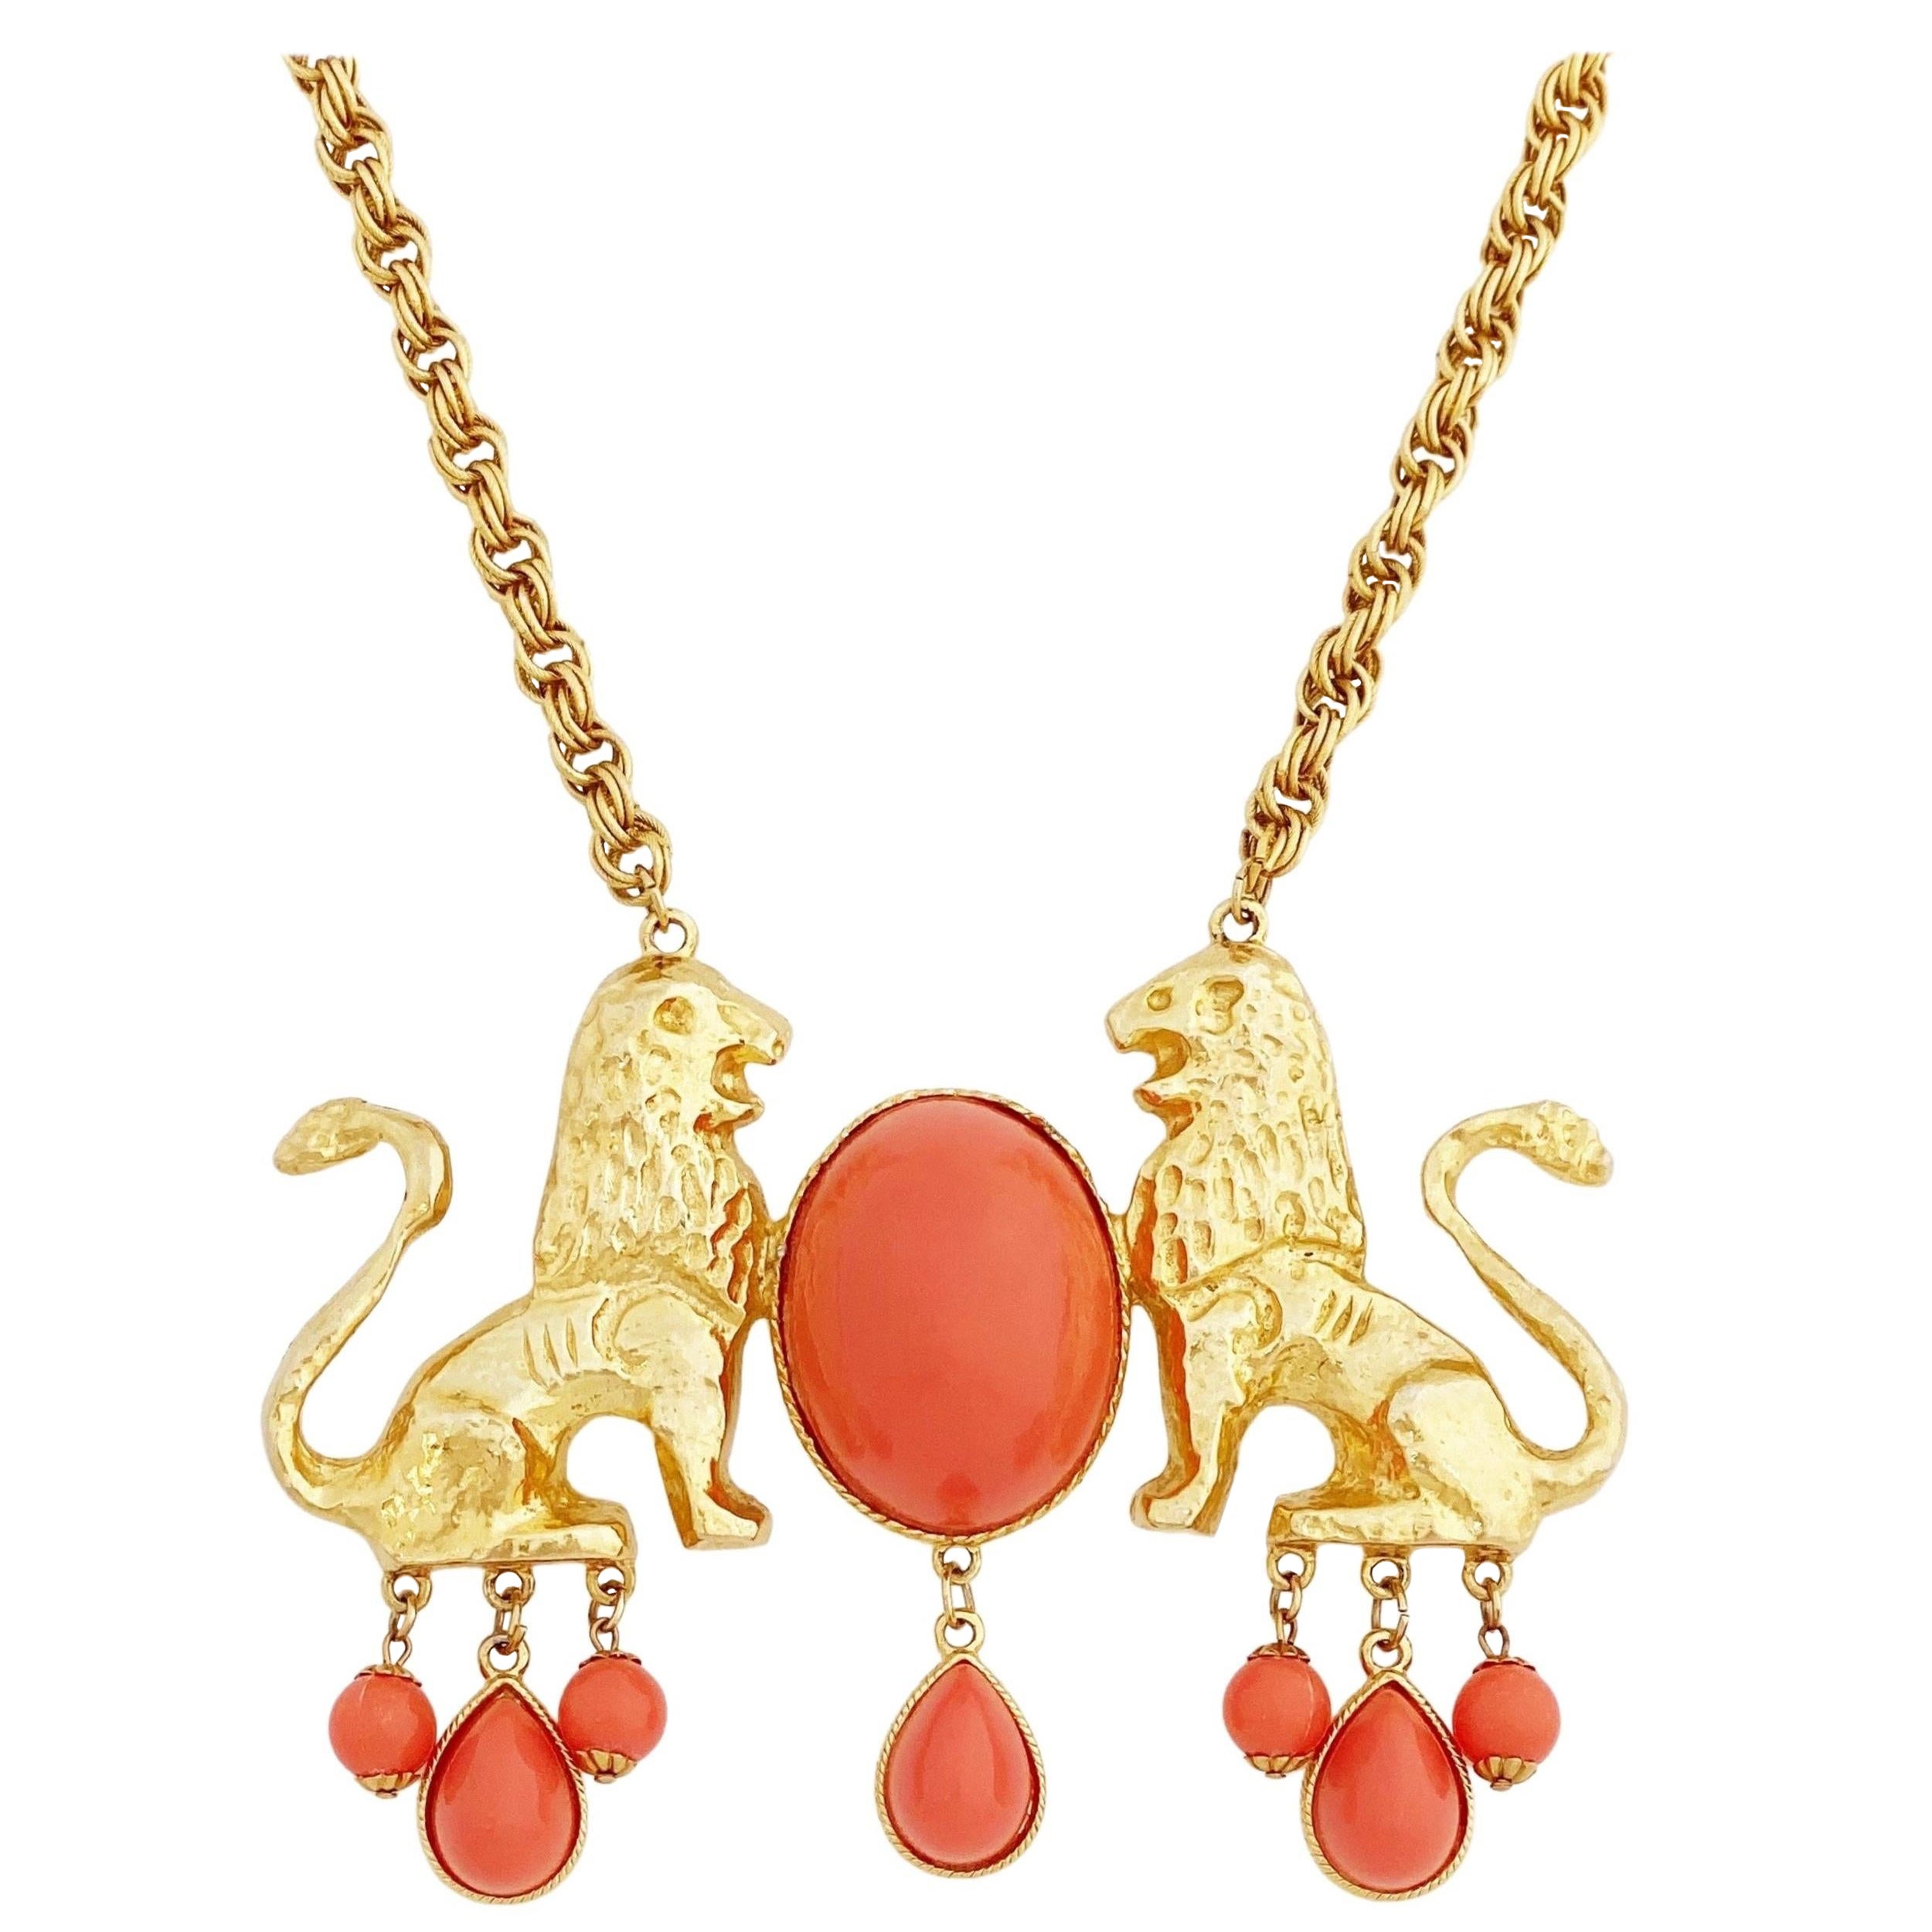 Gilded Twin Lions Statement Necklace with Coral Cabochons by Donald Stannard